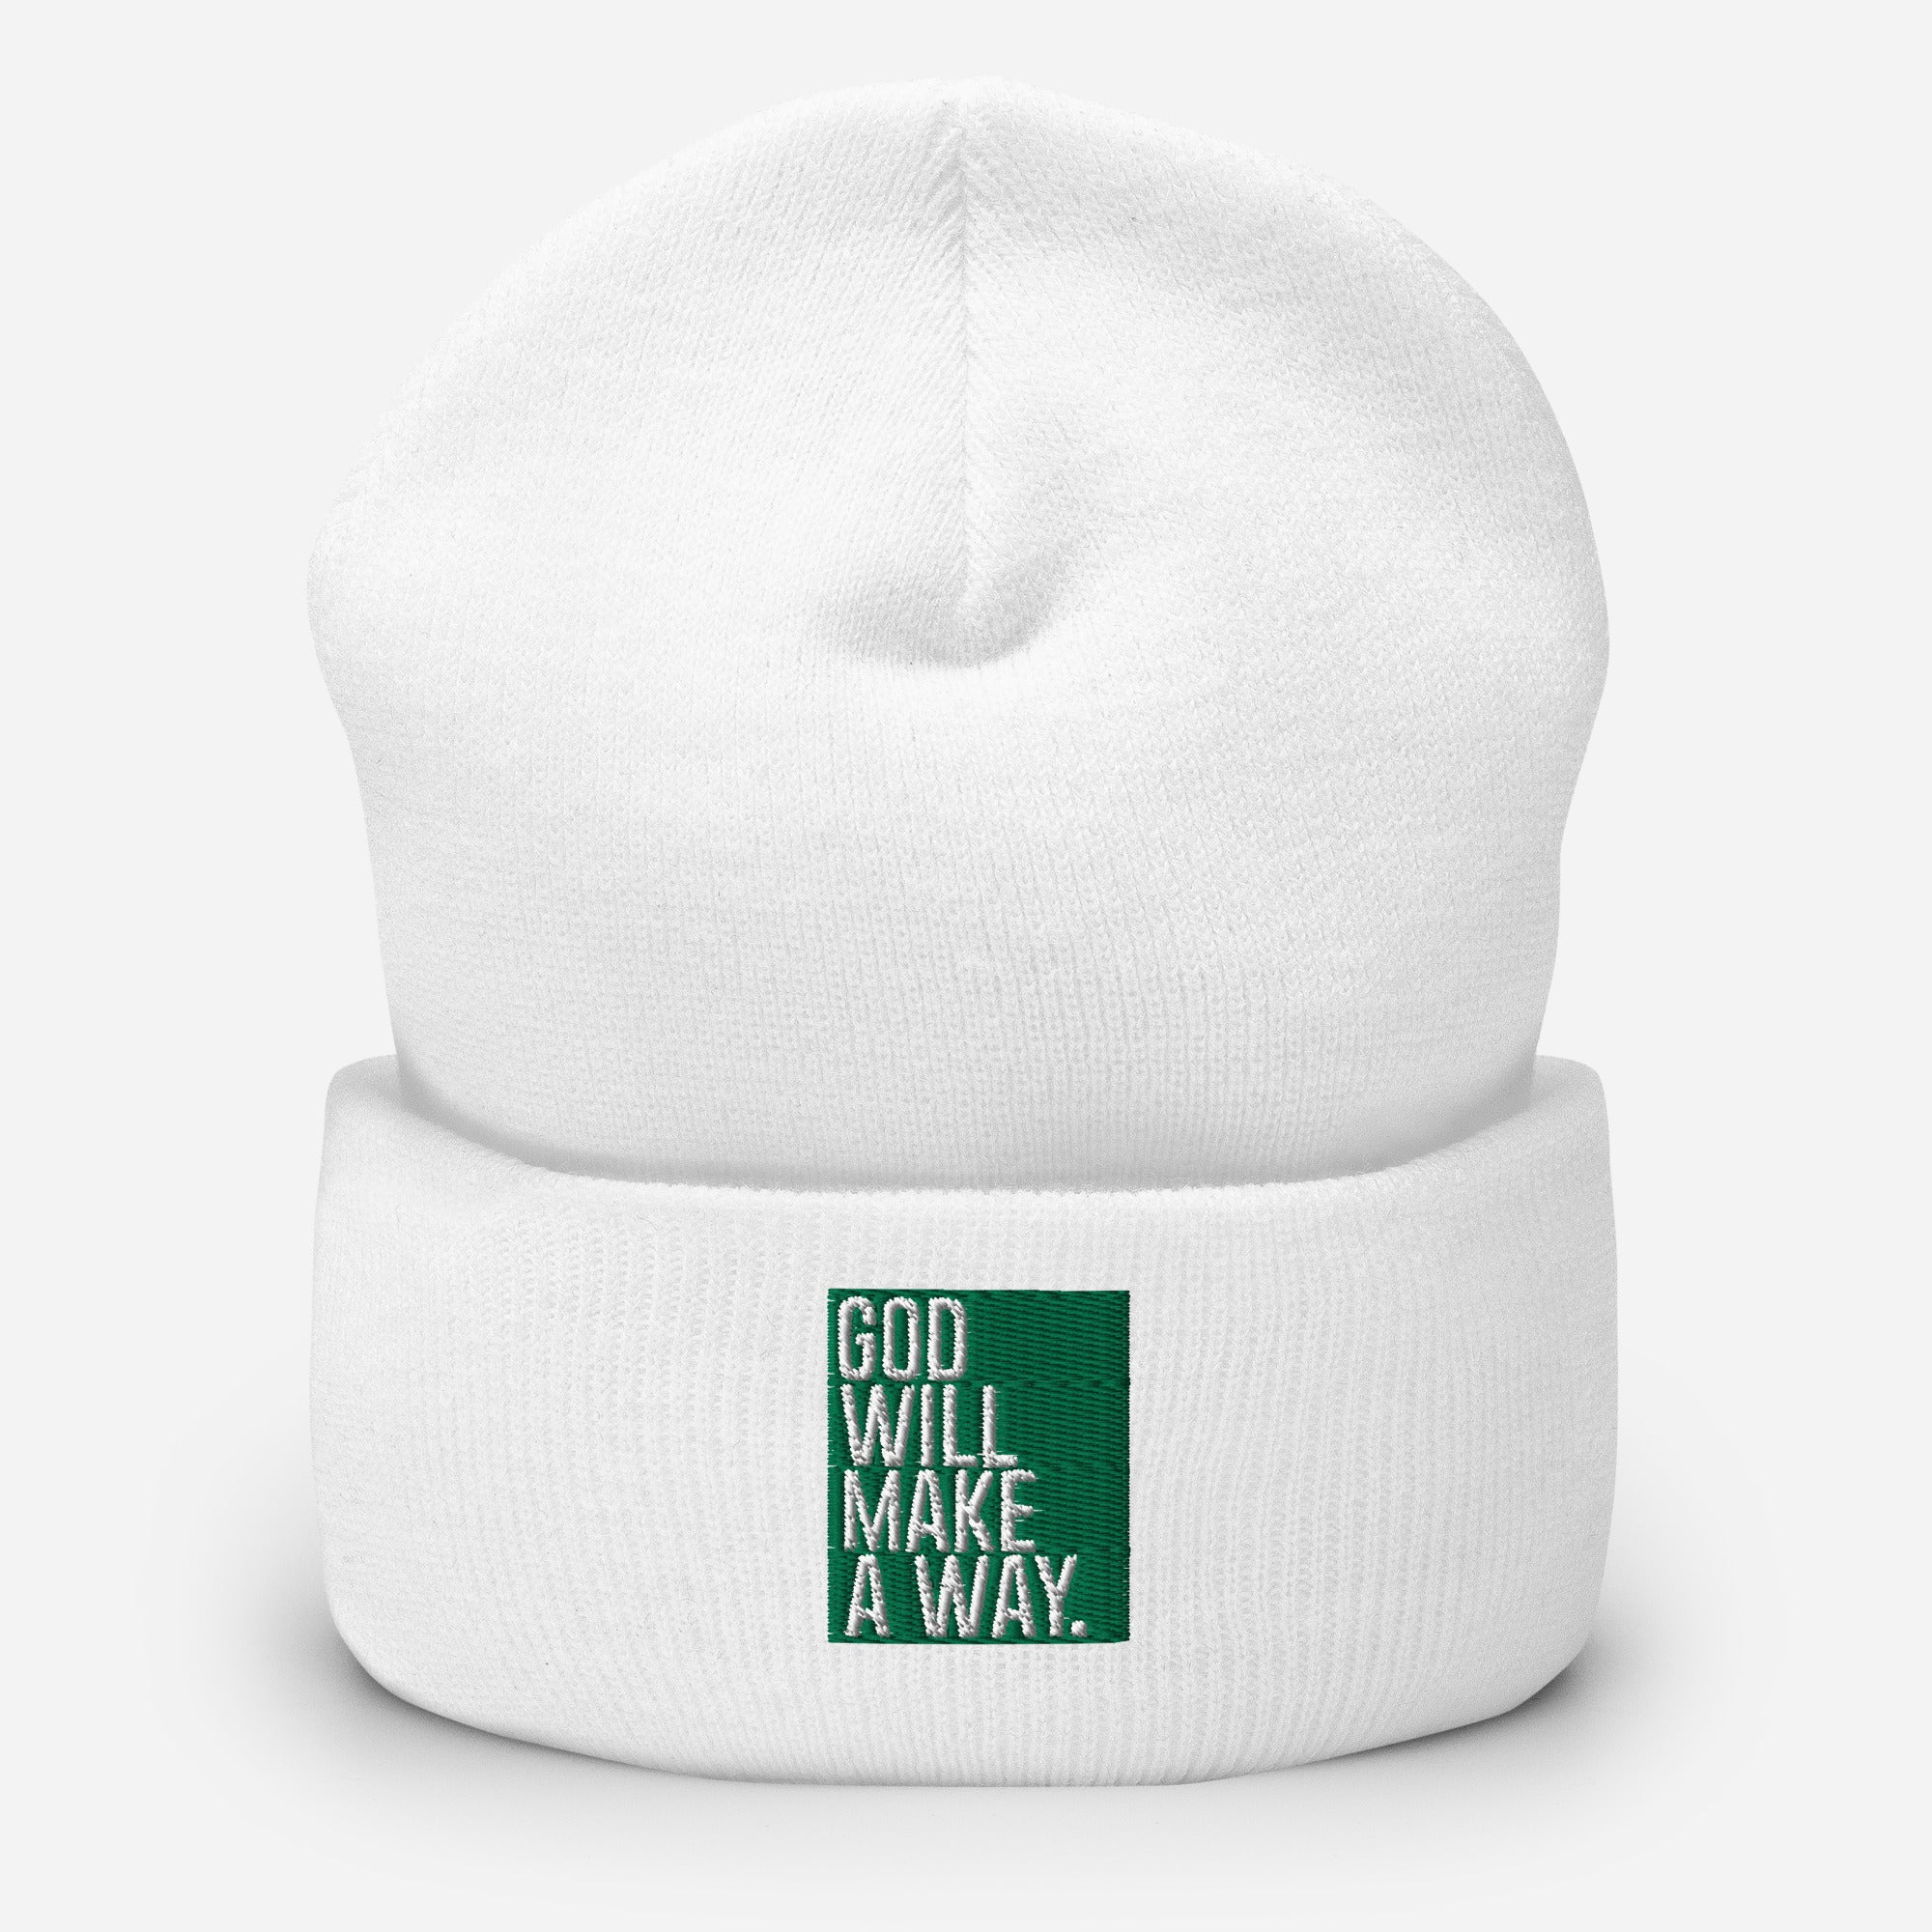 God Will Make A Way Beanie, Used By God, Used By God Clothing, Christian Apparel, Christian Hats, Christian T-Shirts, Christian Clothing, God Shirts, Christian Sweatshirts, God Clothing, Jesus Hoodie, Jesus Clothes, God Is Dope, Art Of Homage, Red Letter Clothing, Elevated Faith, Active Faith Sports, Beacon Threads, God The Father Apparel